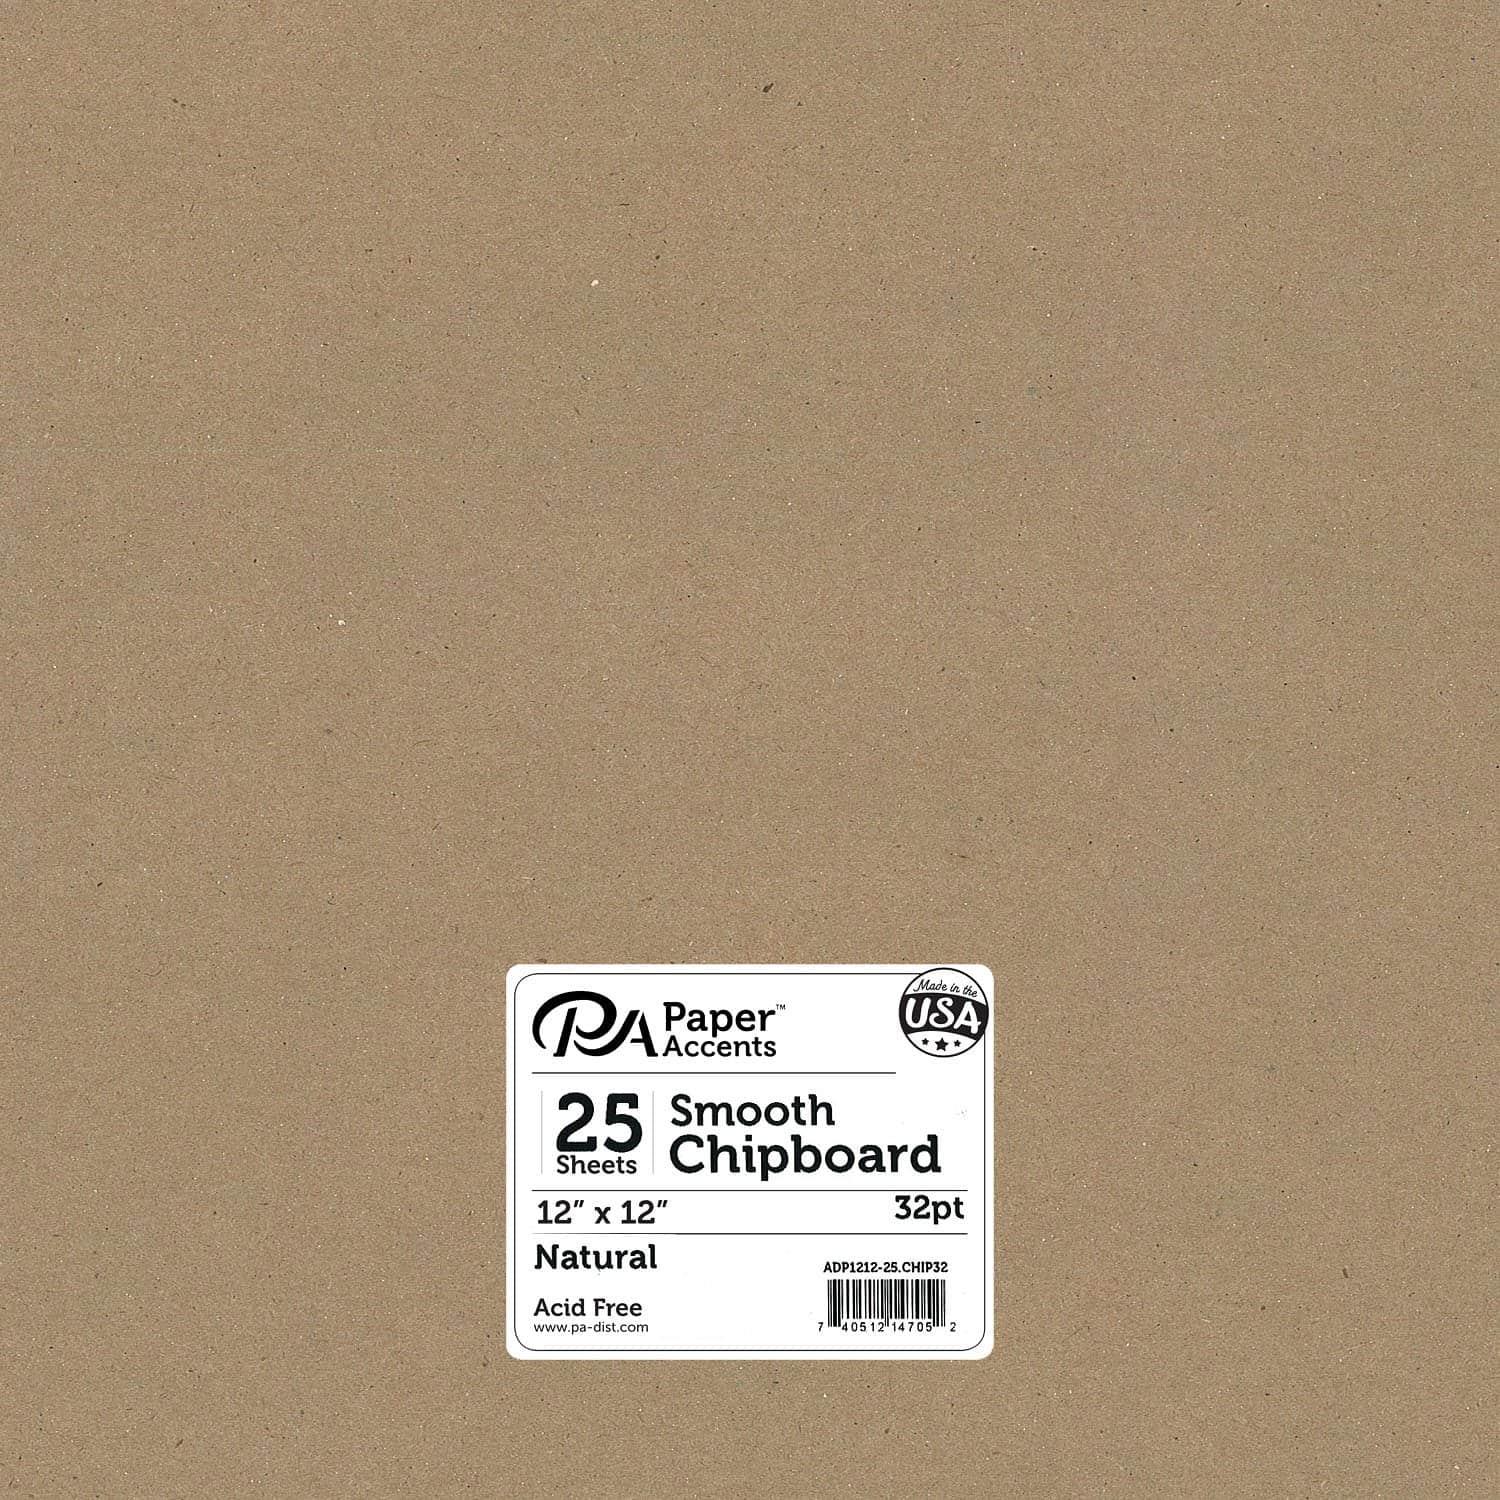 PA Paper&#x2122; Accents Natural 12&#x22; x 12&#x22; 32pt. Heavy Chipboard, 25 Sheets